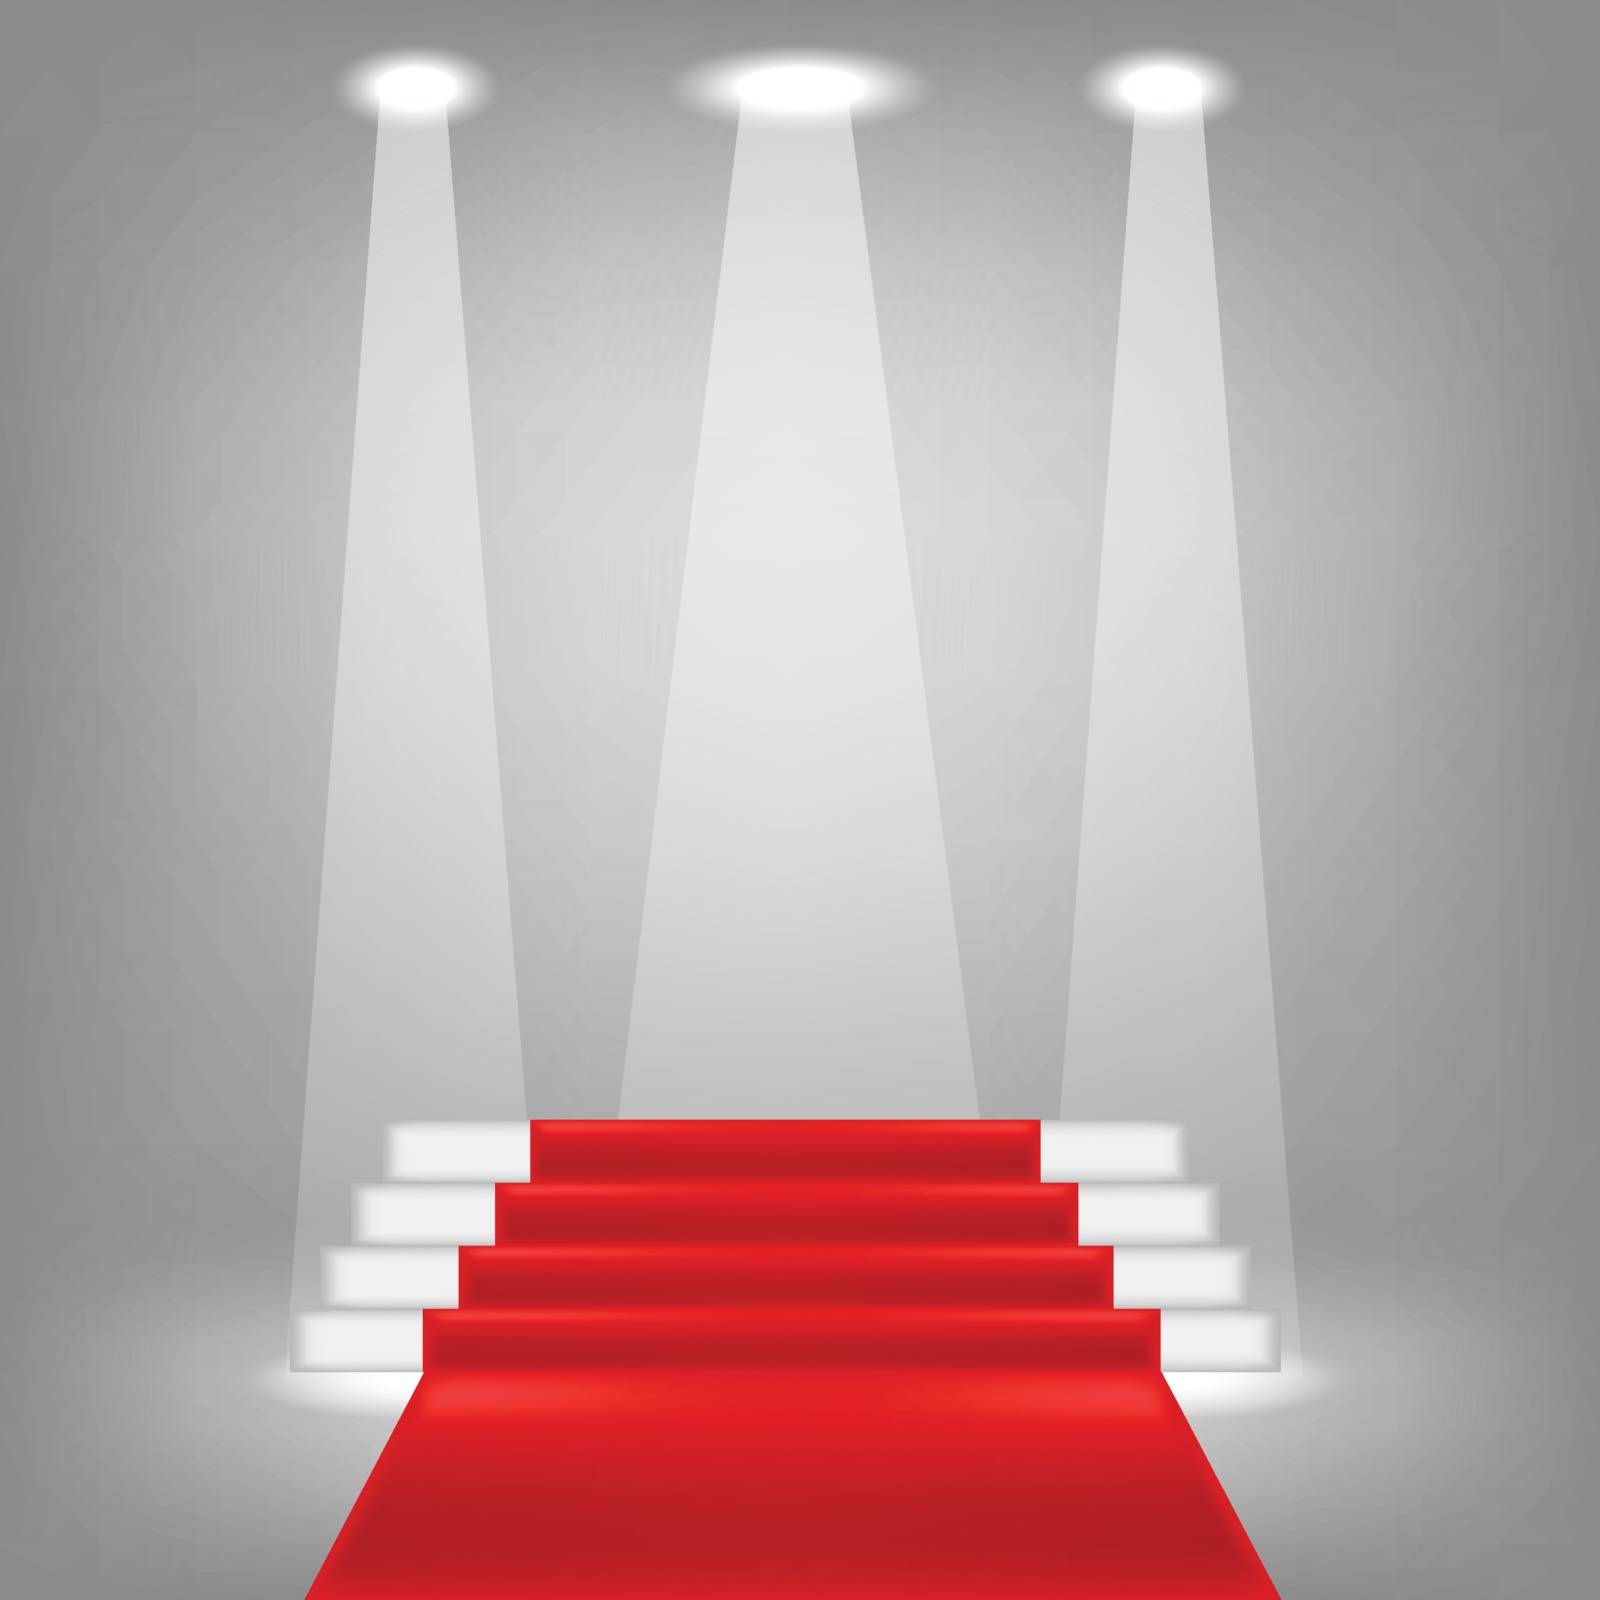  illustration  with red carpet on grey background